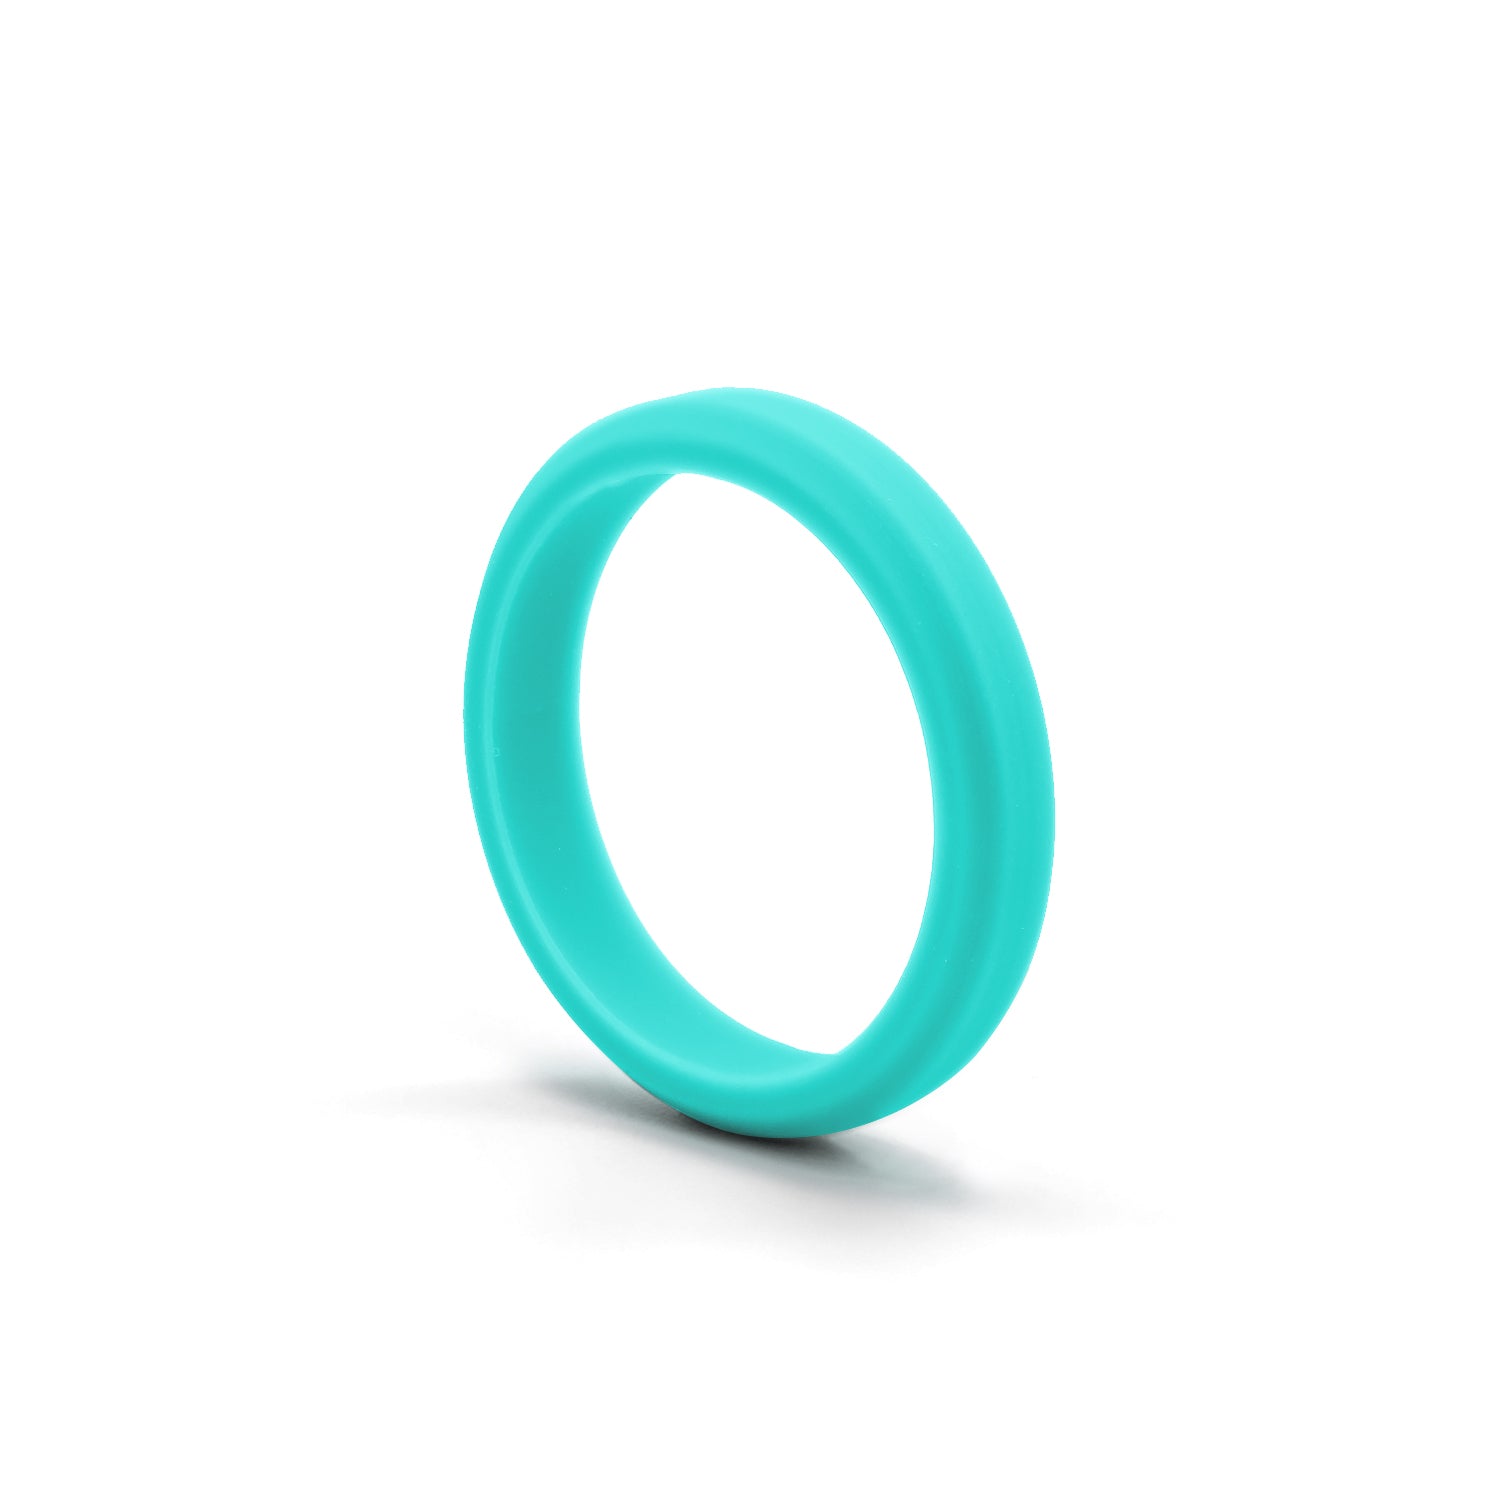 Aqua Blue Bevel Silicone Rubber Rings For Women